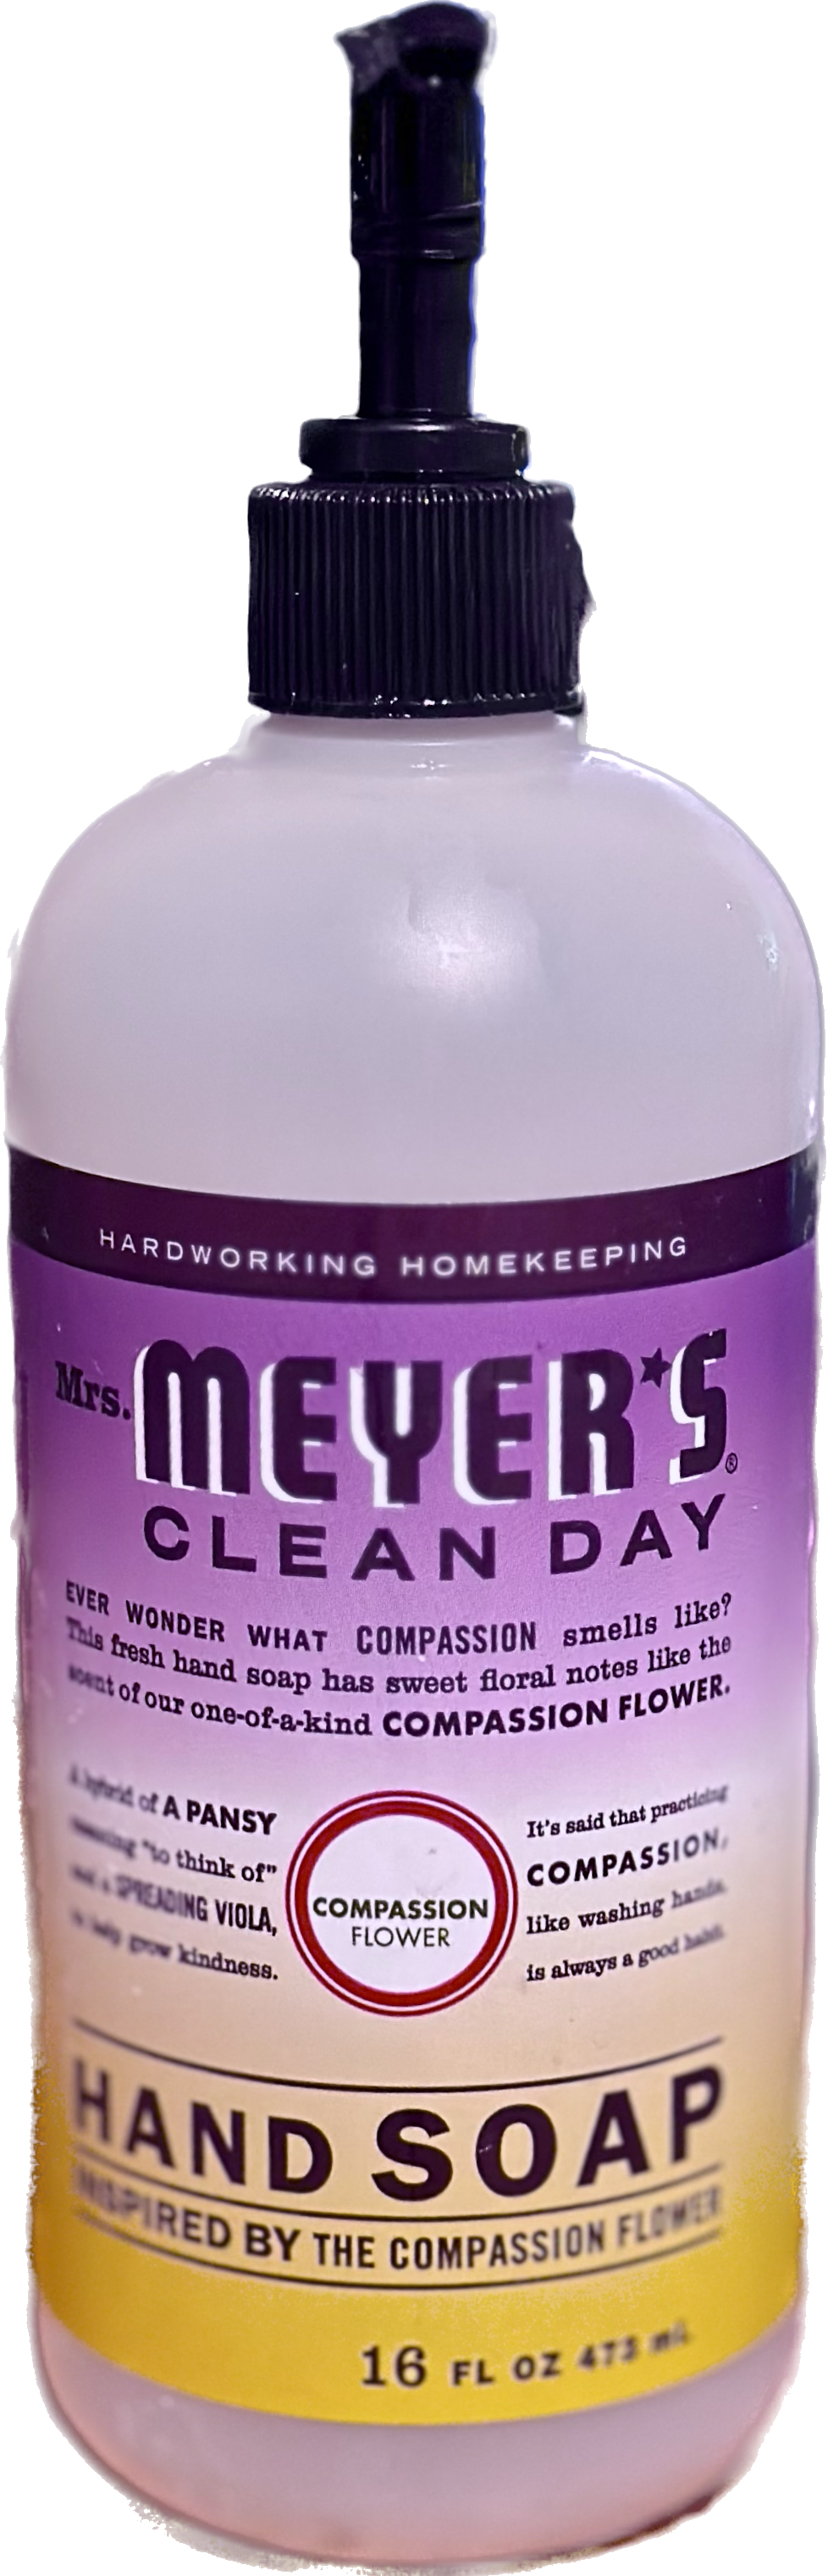 A photo of Mrs. Meyer’s Clean Day hand soap, Compassion Flower scent